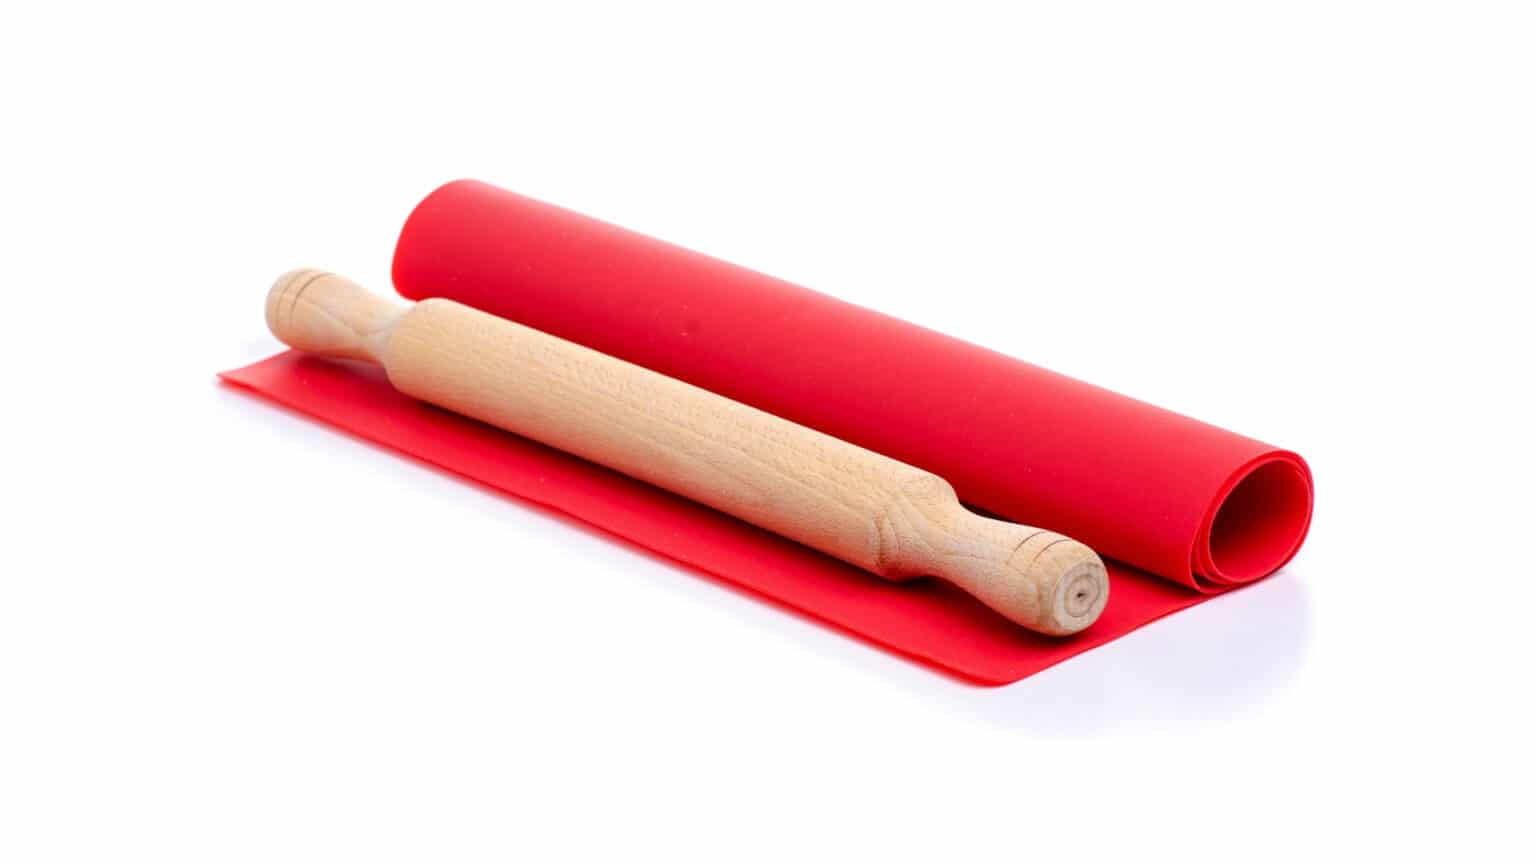 Types of Silicone Baking Mats